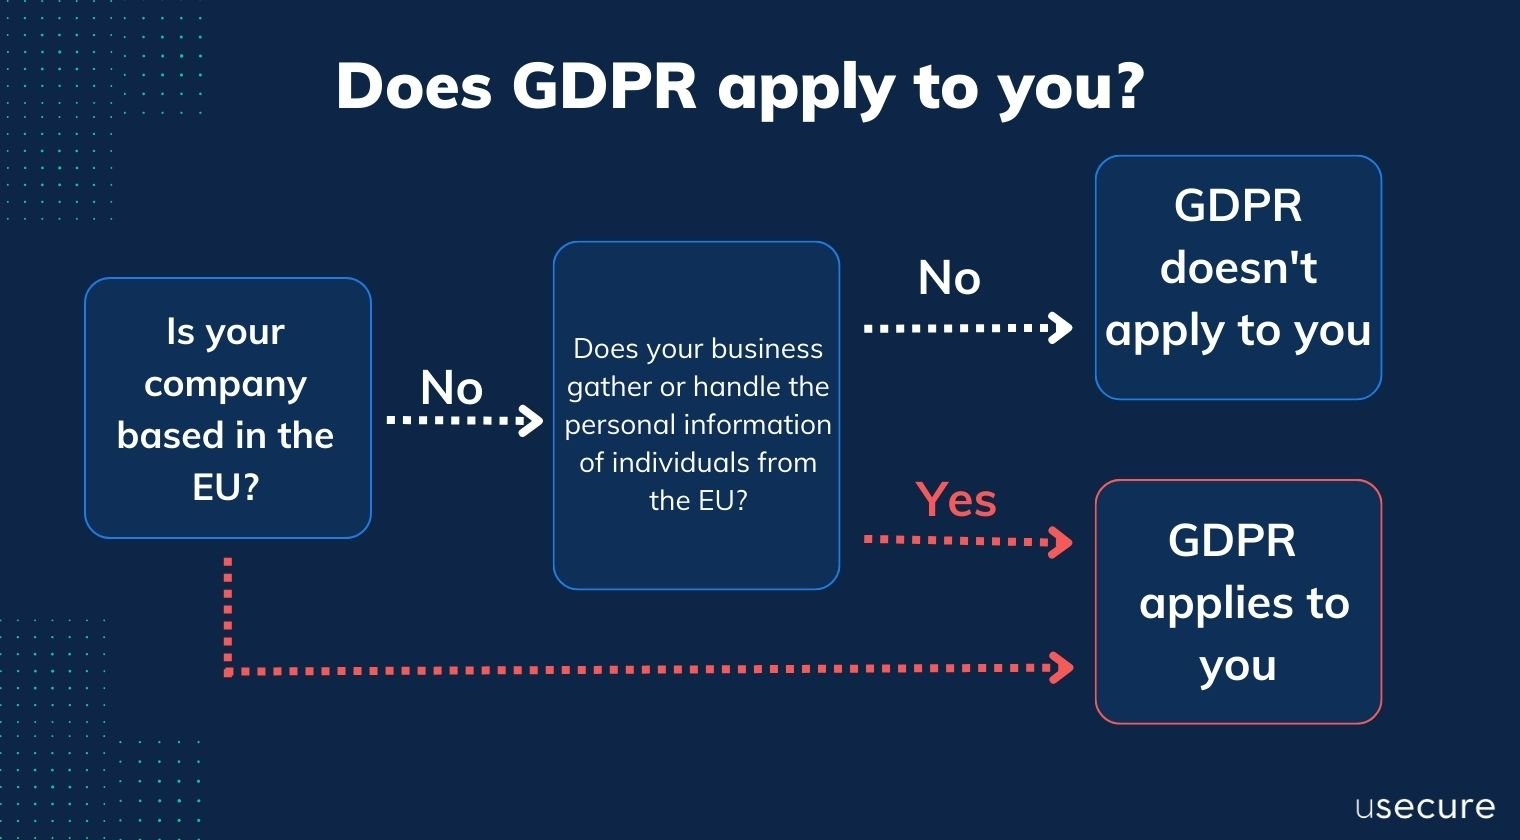 Does GDPR apply to you?